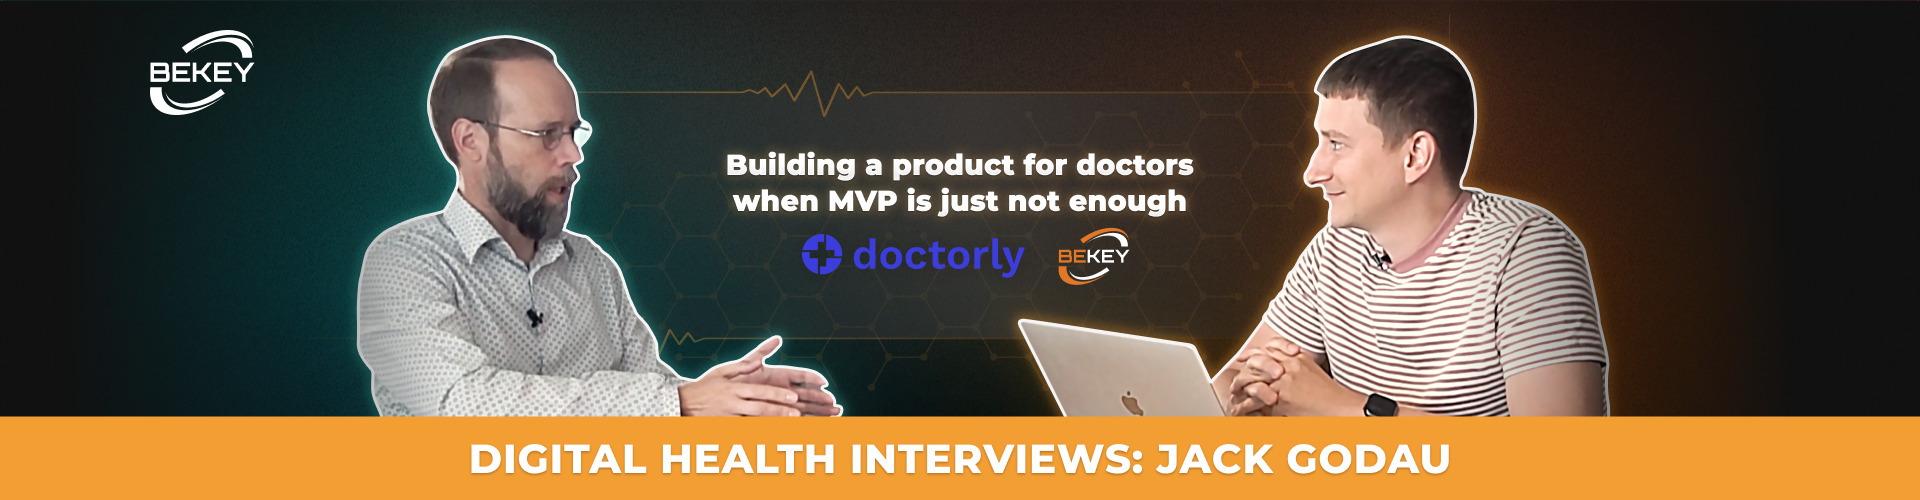 Building a Product for Doctors When MVP Is Just Not Enough - image